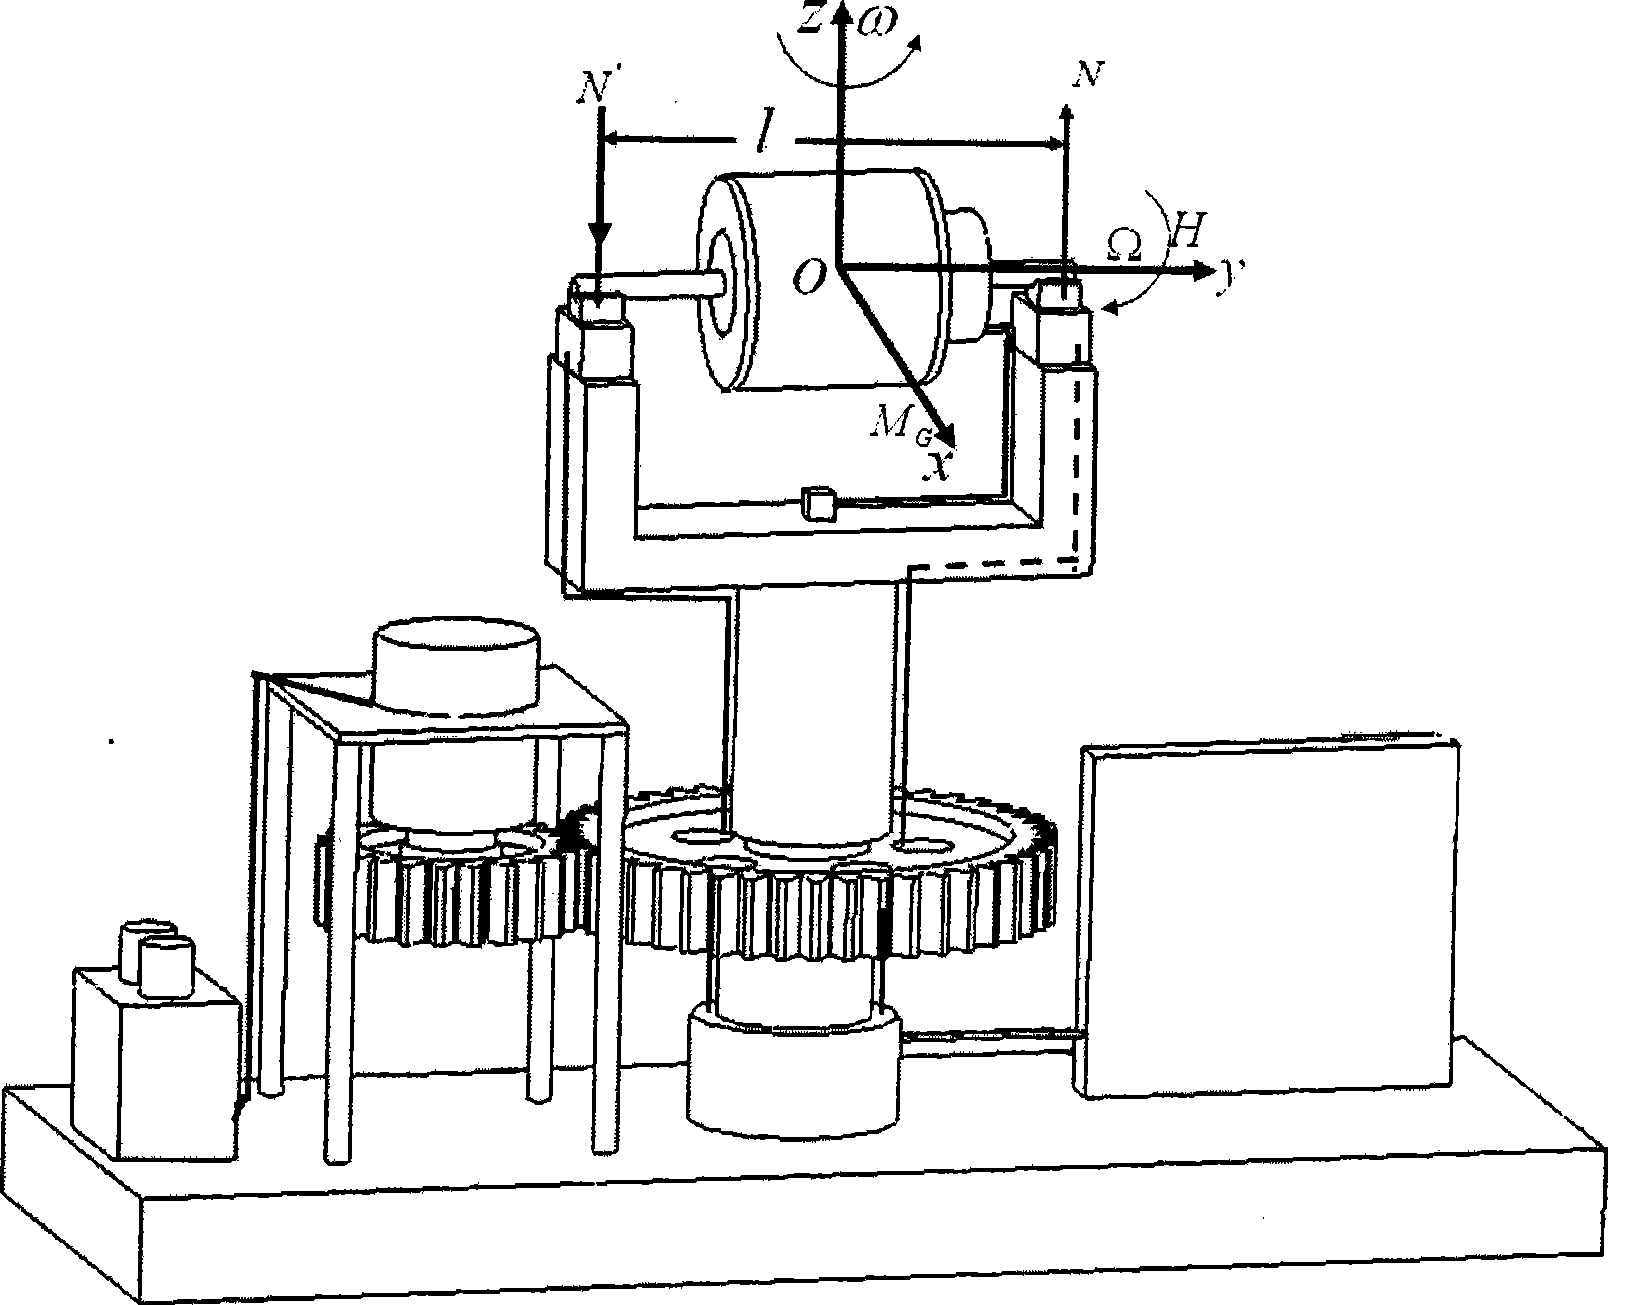 Apparatus and method for measuring gyro moment